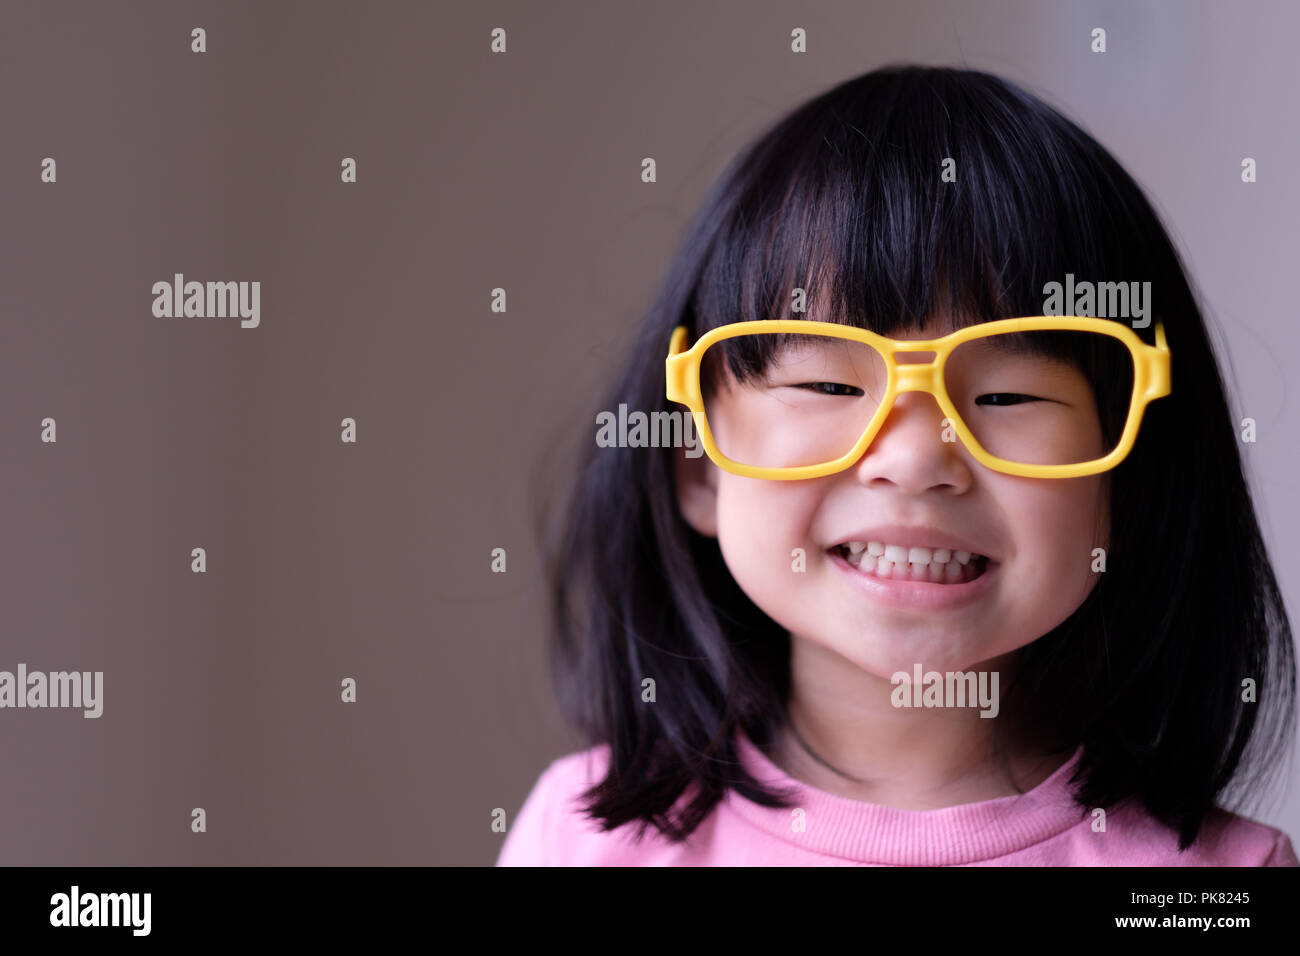 Funny little child with big yellow glasses Stock Photo